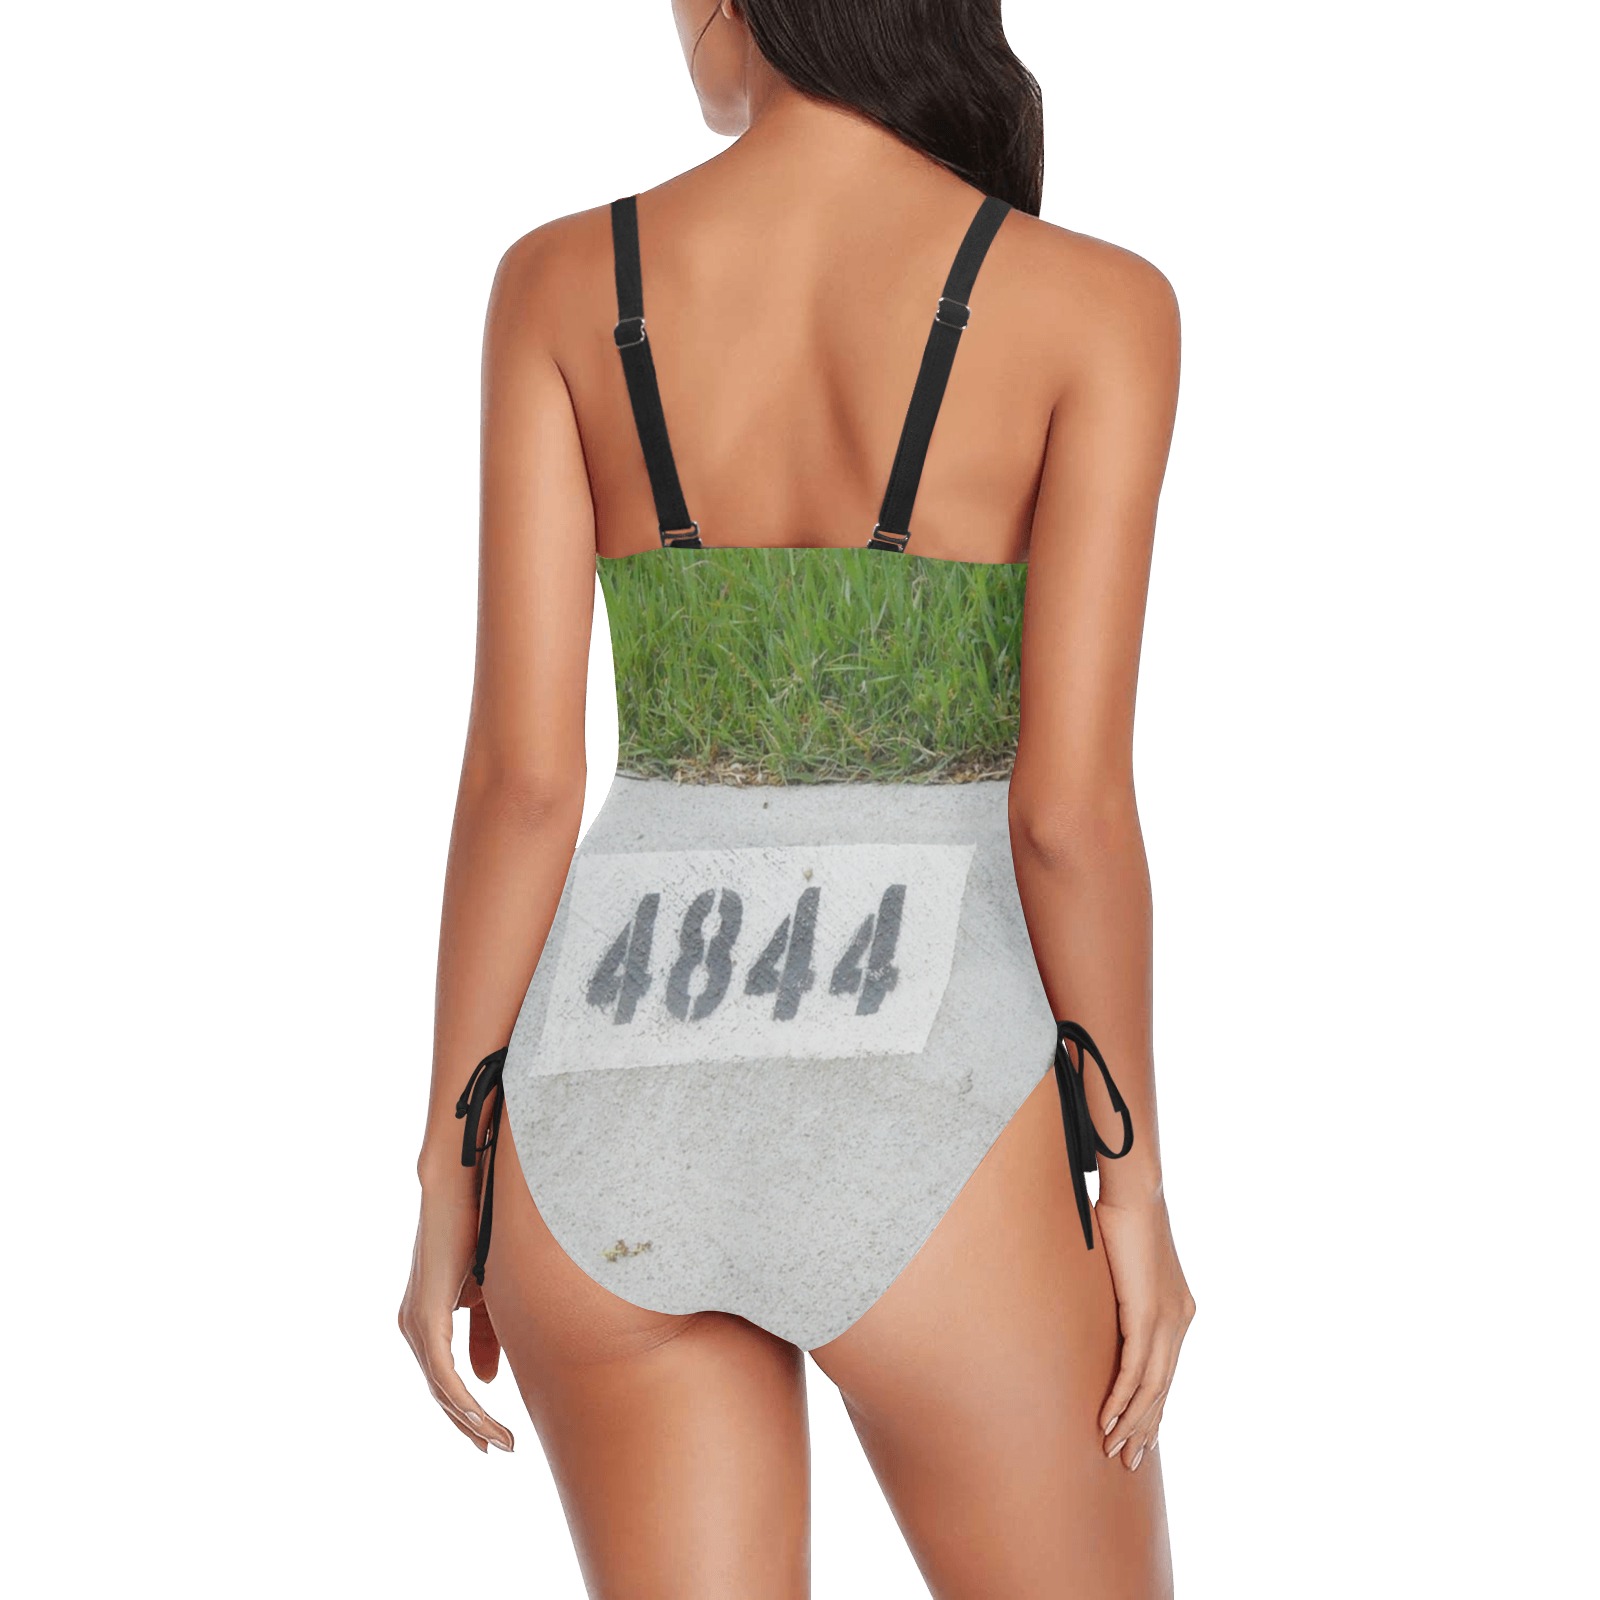 Street Number 4844 Drawstring Side One-Piece Swimsuit (Model S14)